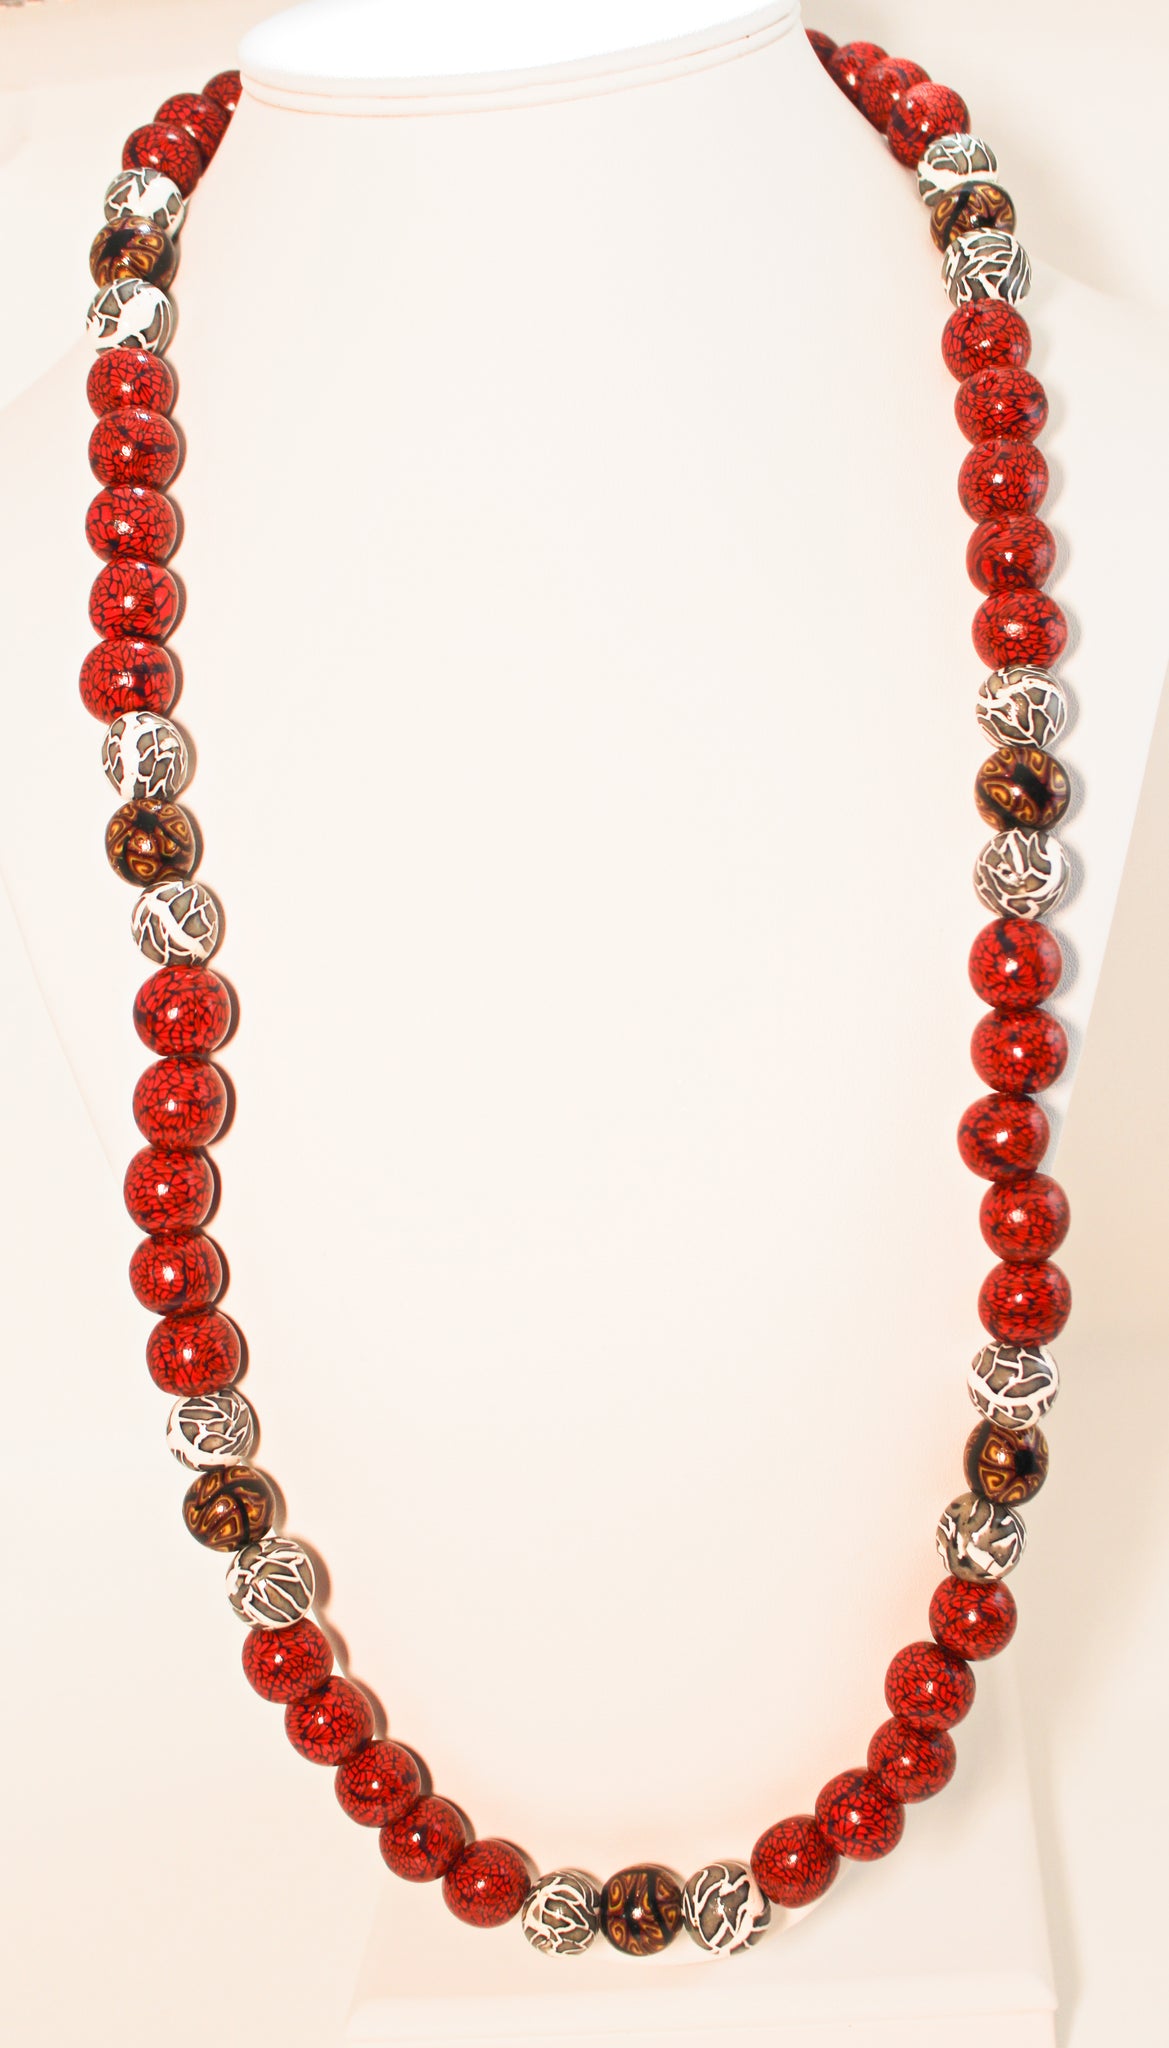 KD-SS006 The "Cassian" Hand-Rolled 32 Inch, Gender-Neutral Necklace